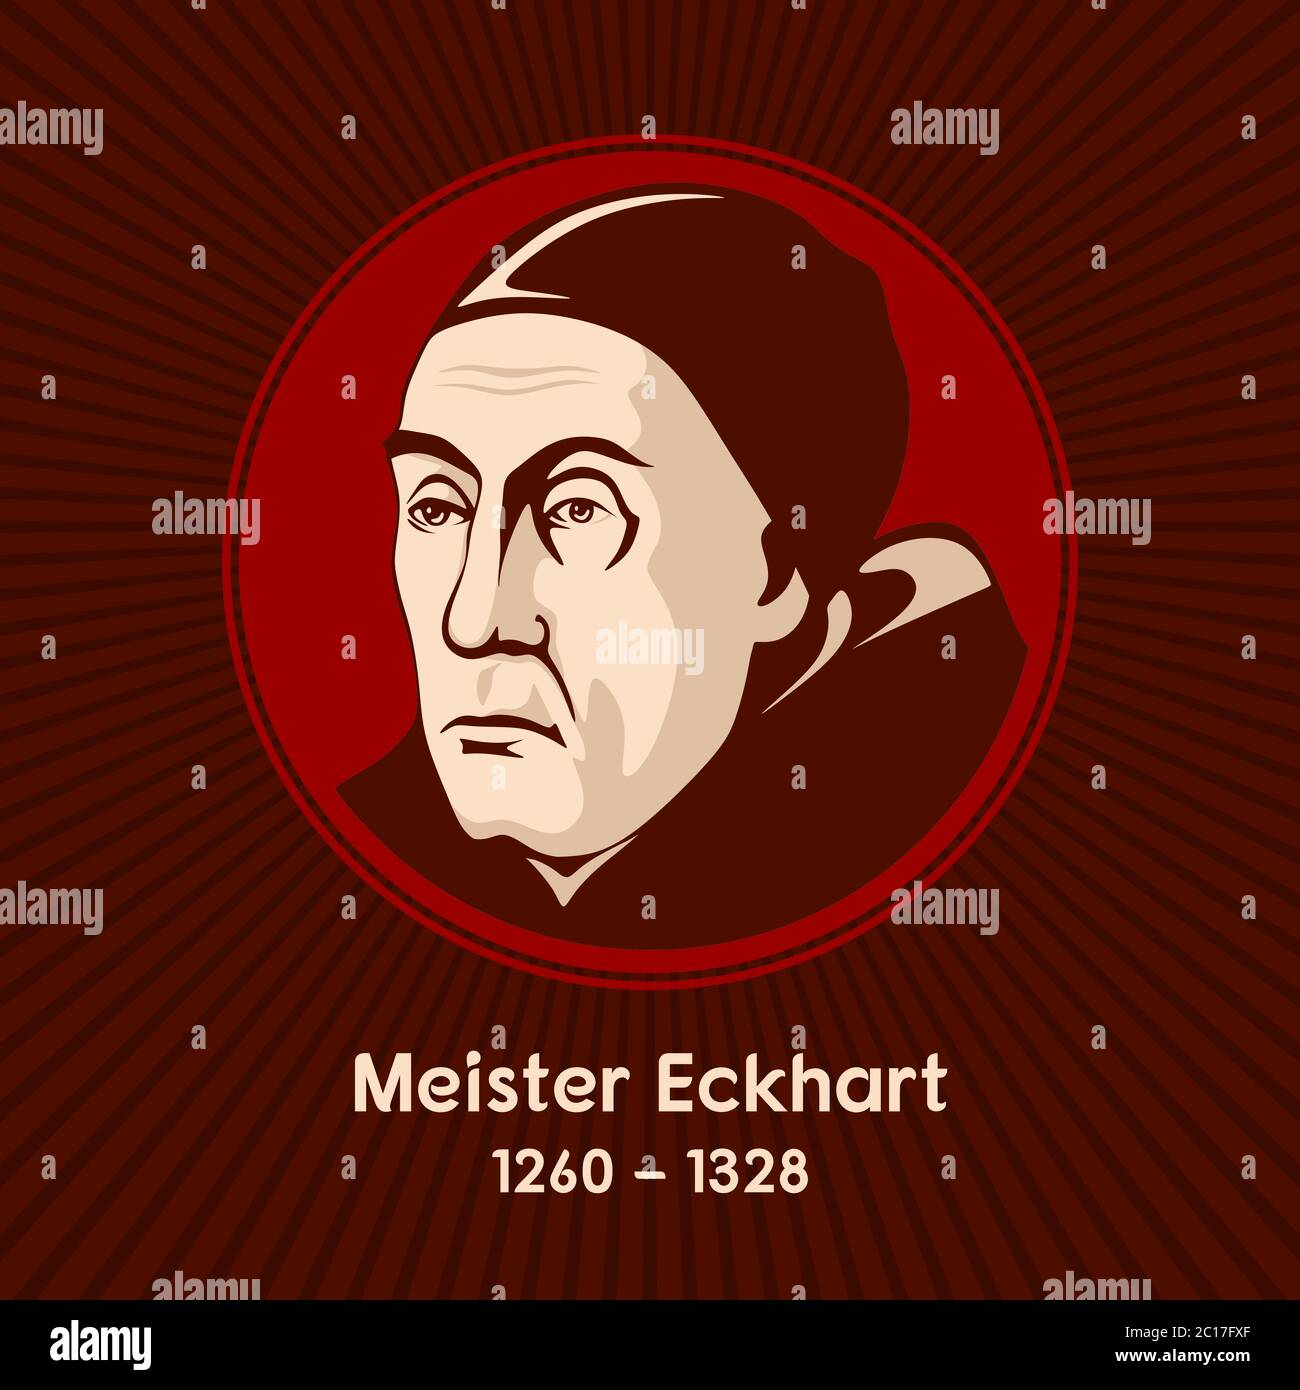 Meister Eckhart (1260-1328) was a German theologian, philosopher and mystic. Stock Vector